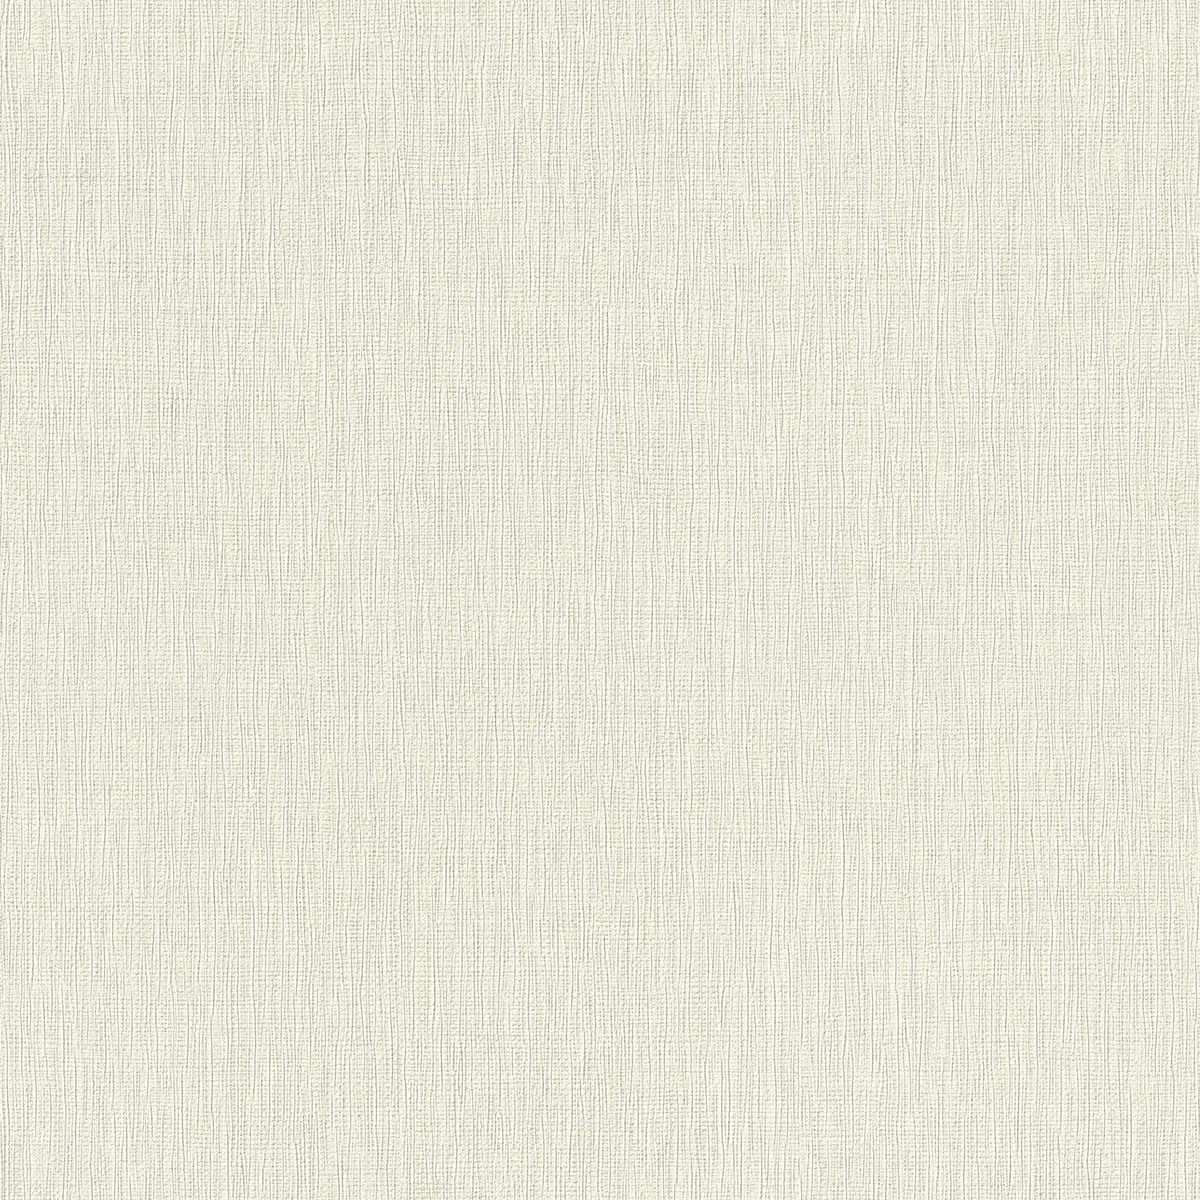 Haast Off-White Vertical Woven Texture Wallpaper |Wallpaper And Borders ...